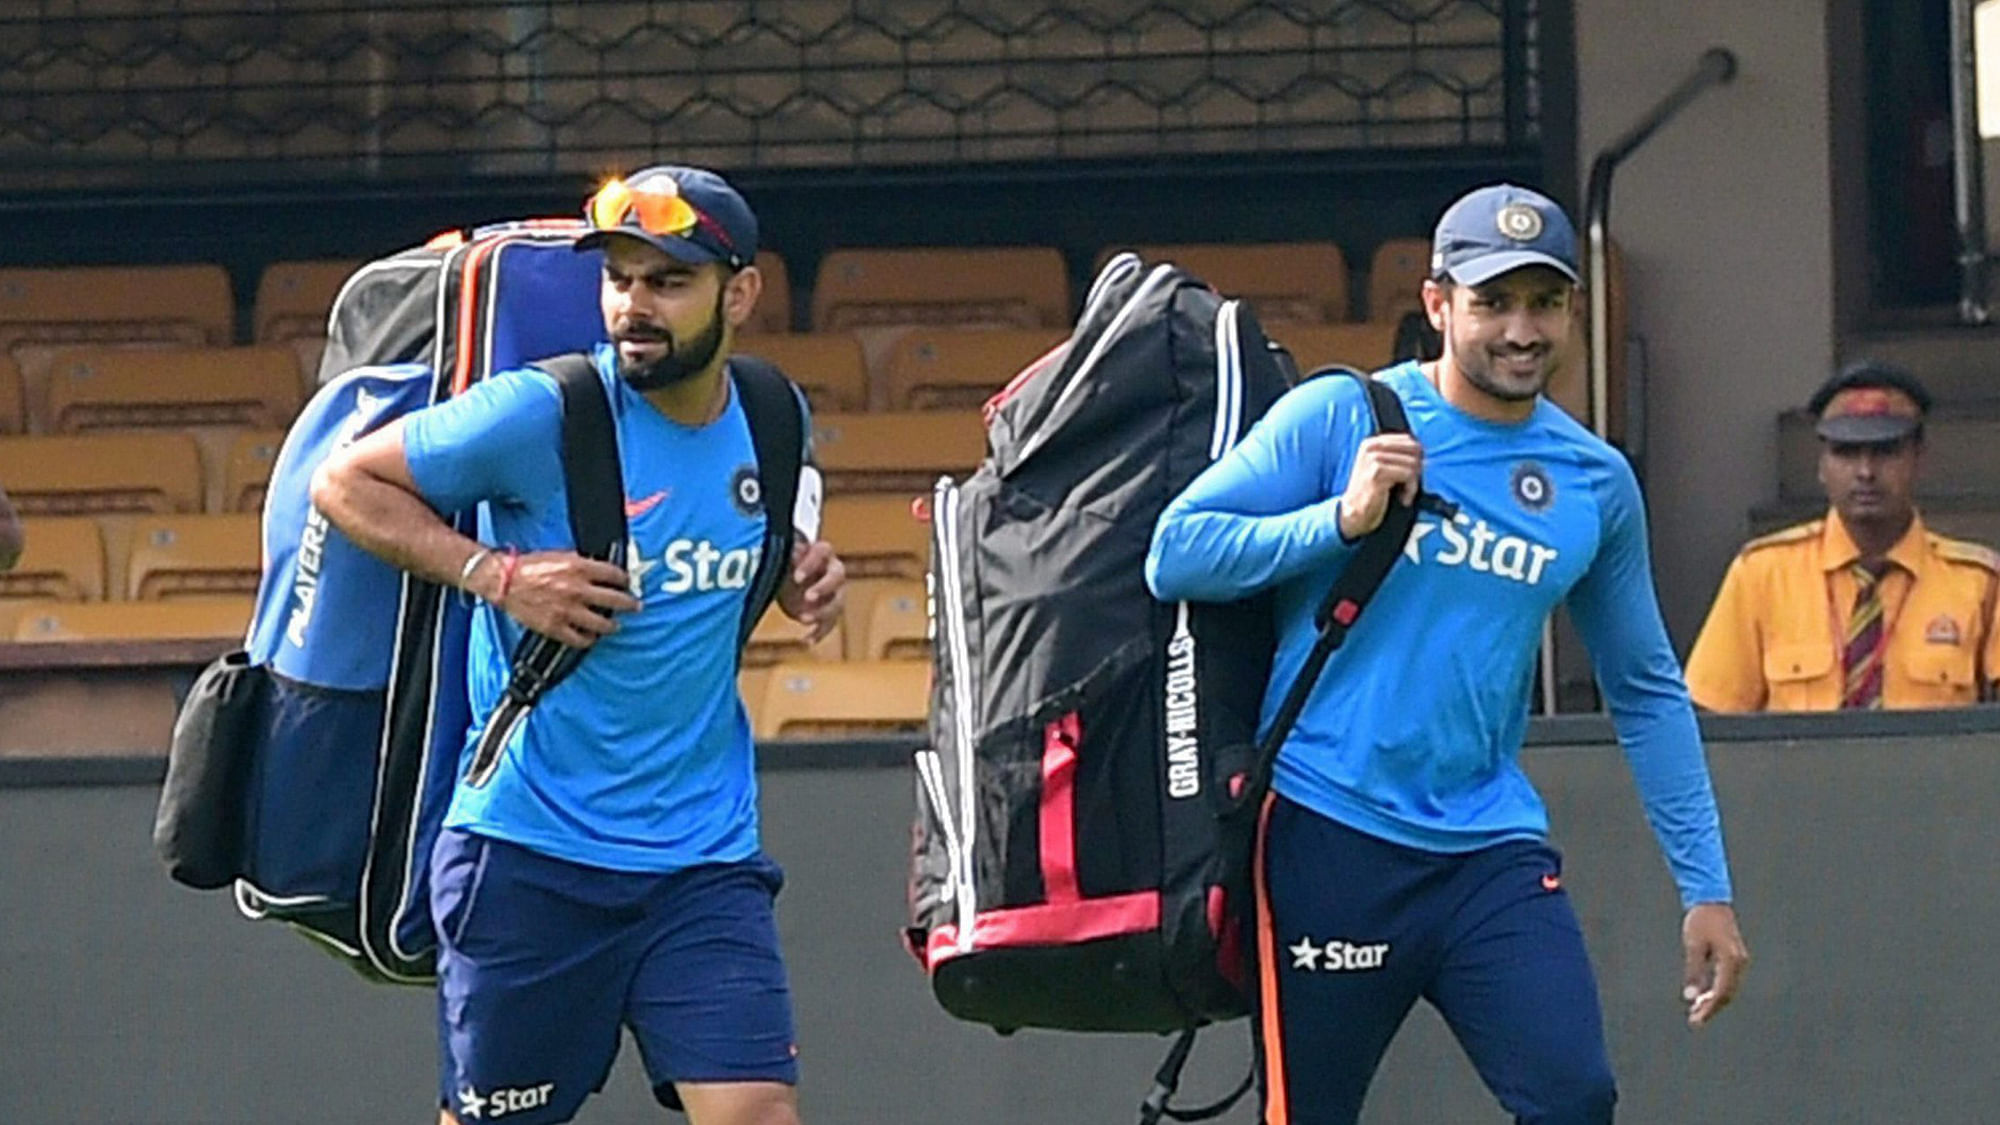 Indian skipper Virat Kohli was asked about Karun Nair’s exclusion from the Indian squad for the West Indies series.